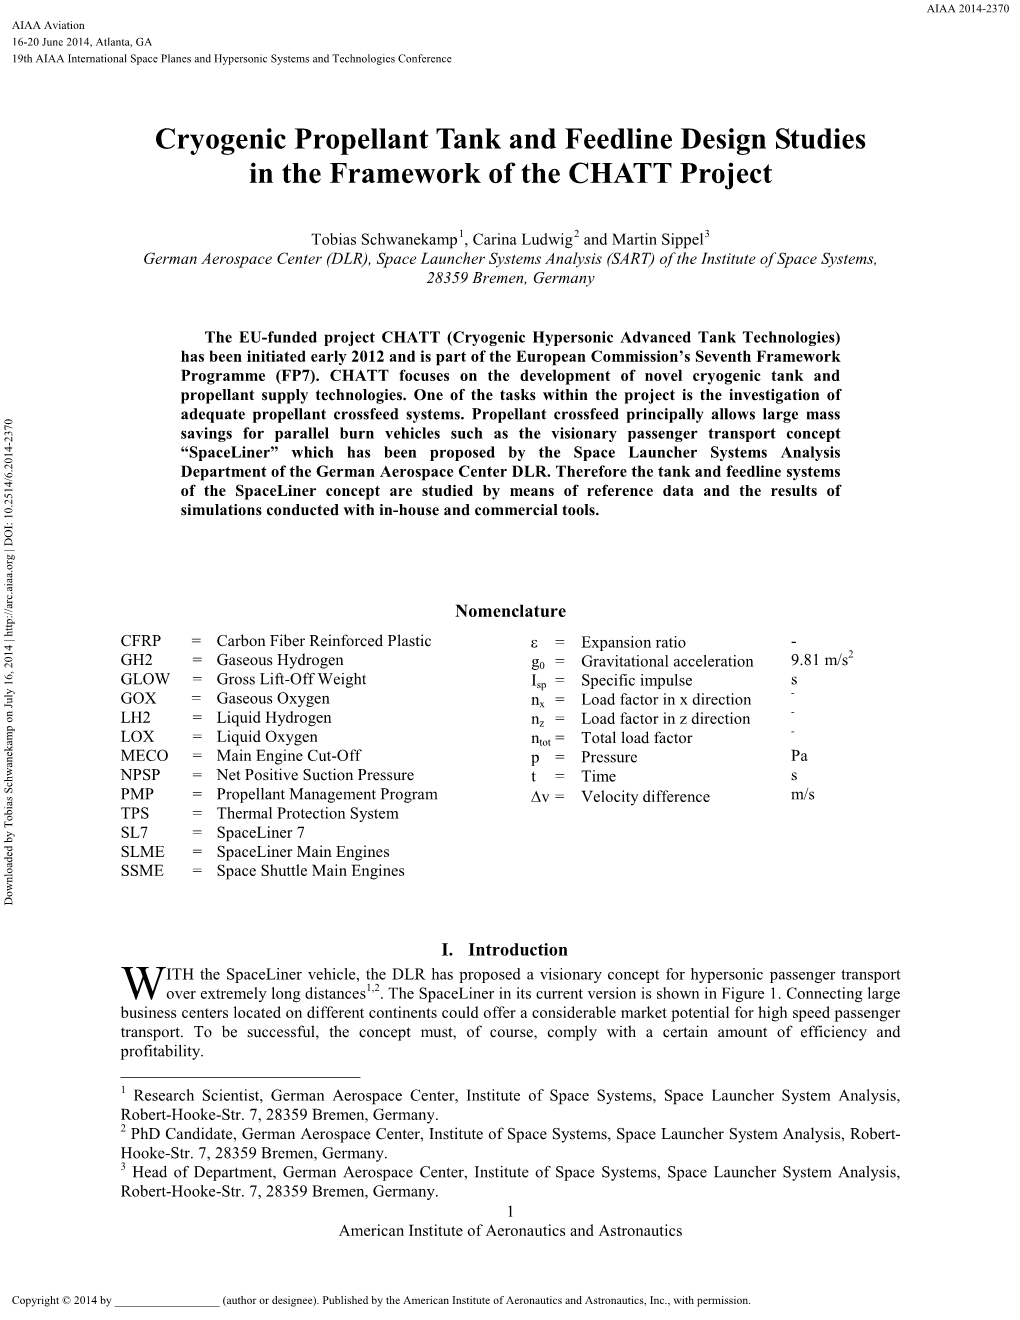 Cryogenic Propellant Tank and Feedline Design Studies in the Framework of the CHATT Project